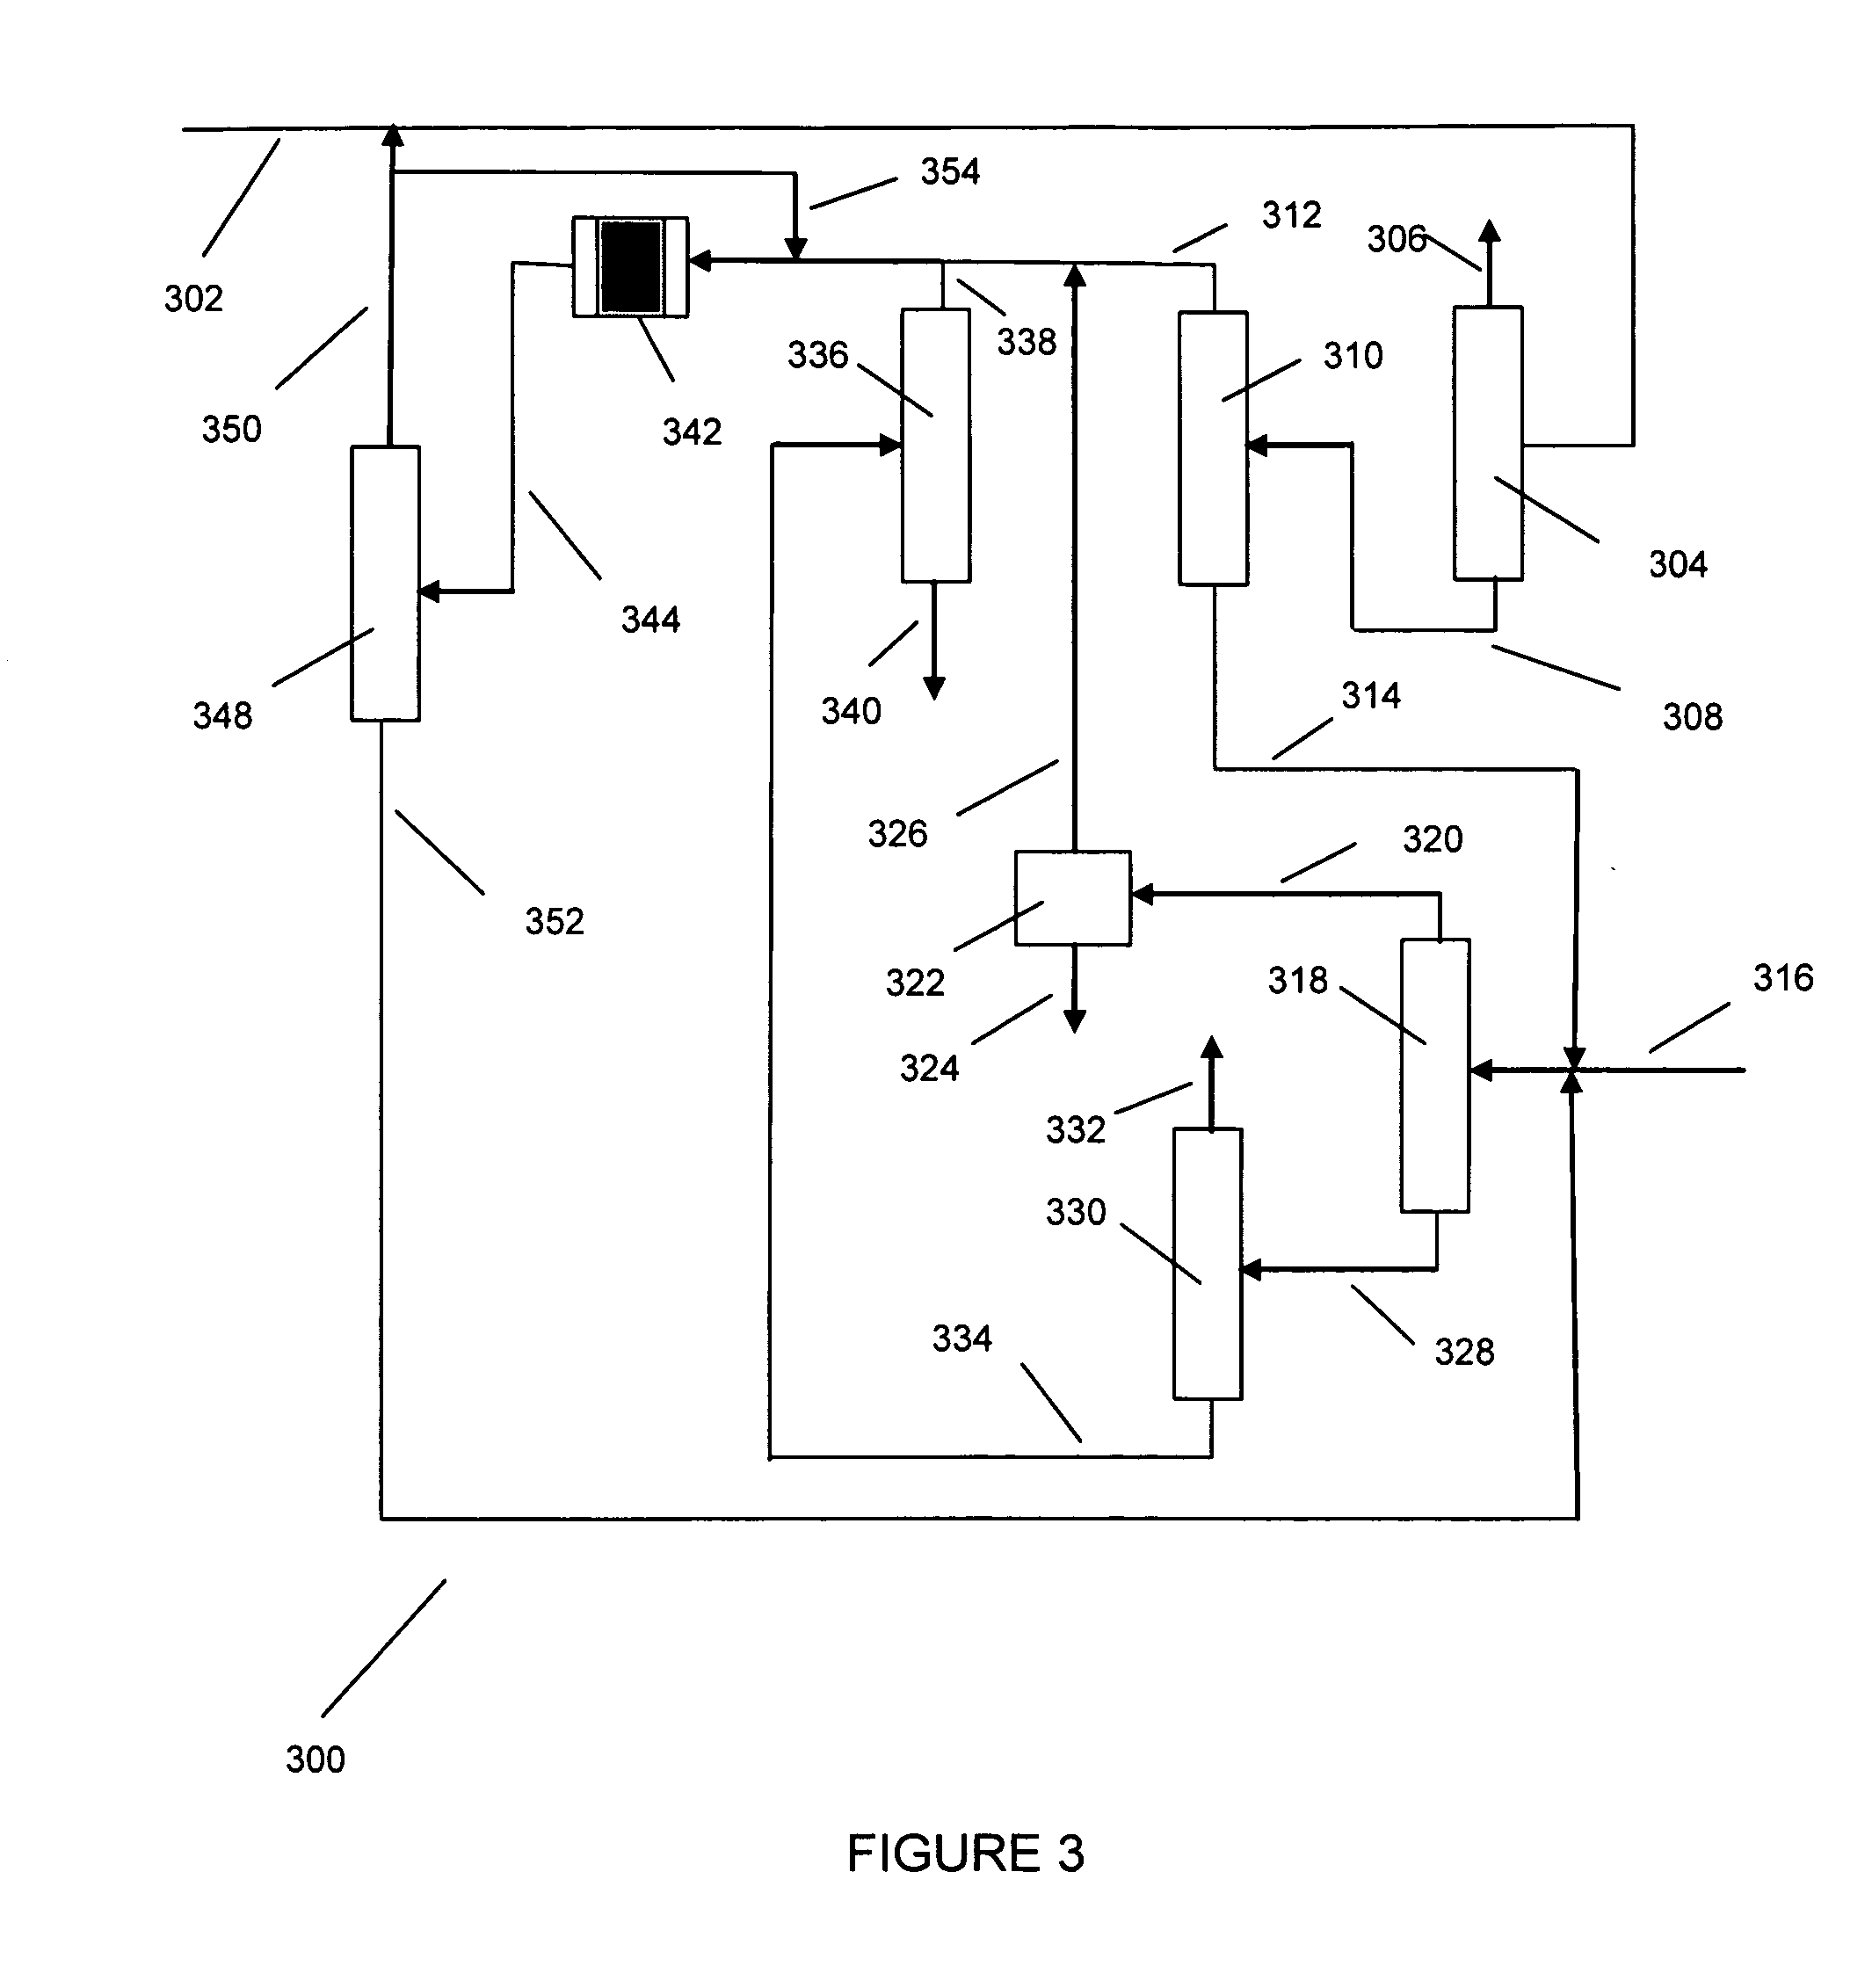 Processes for producing xylenes using isomerization and transalkylation reactions and apparatus therefor